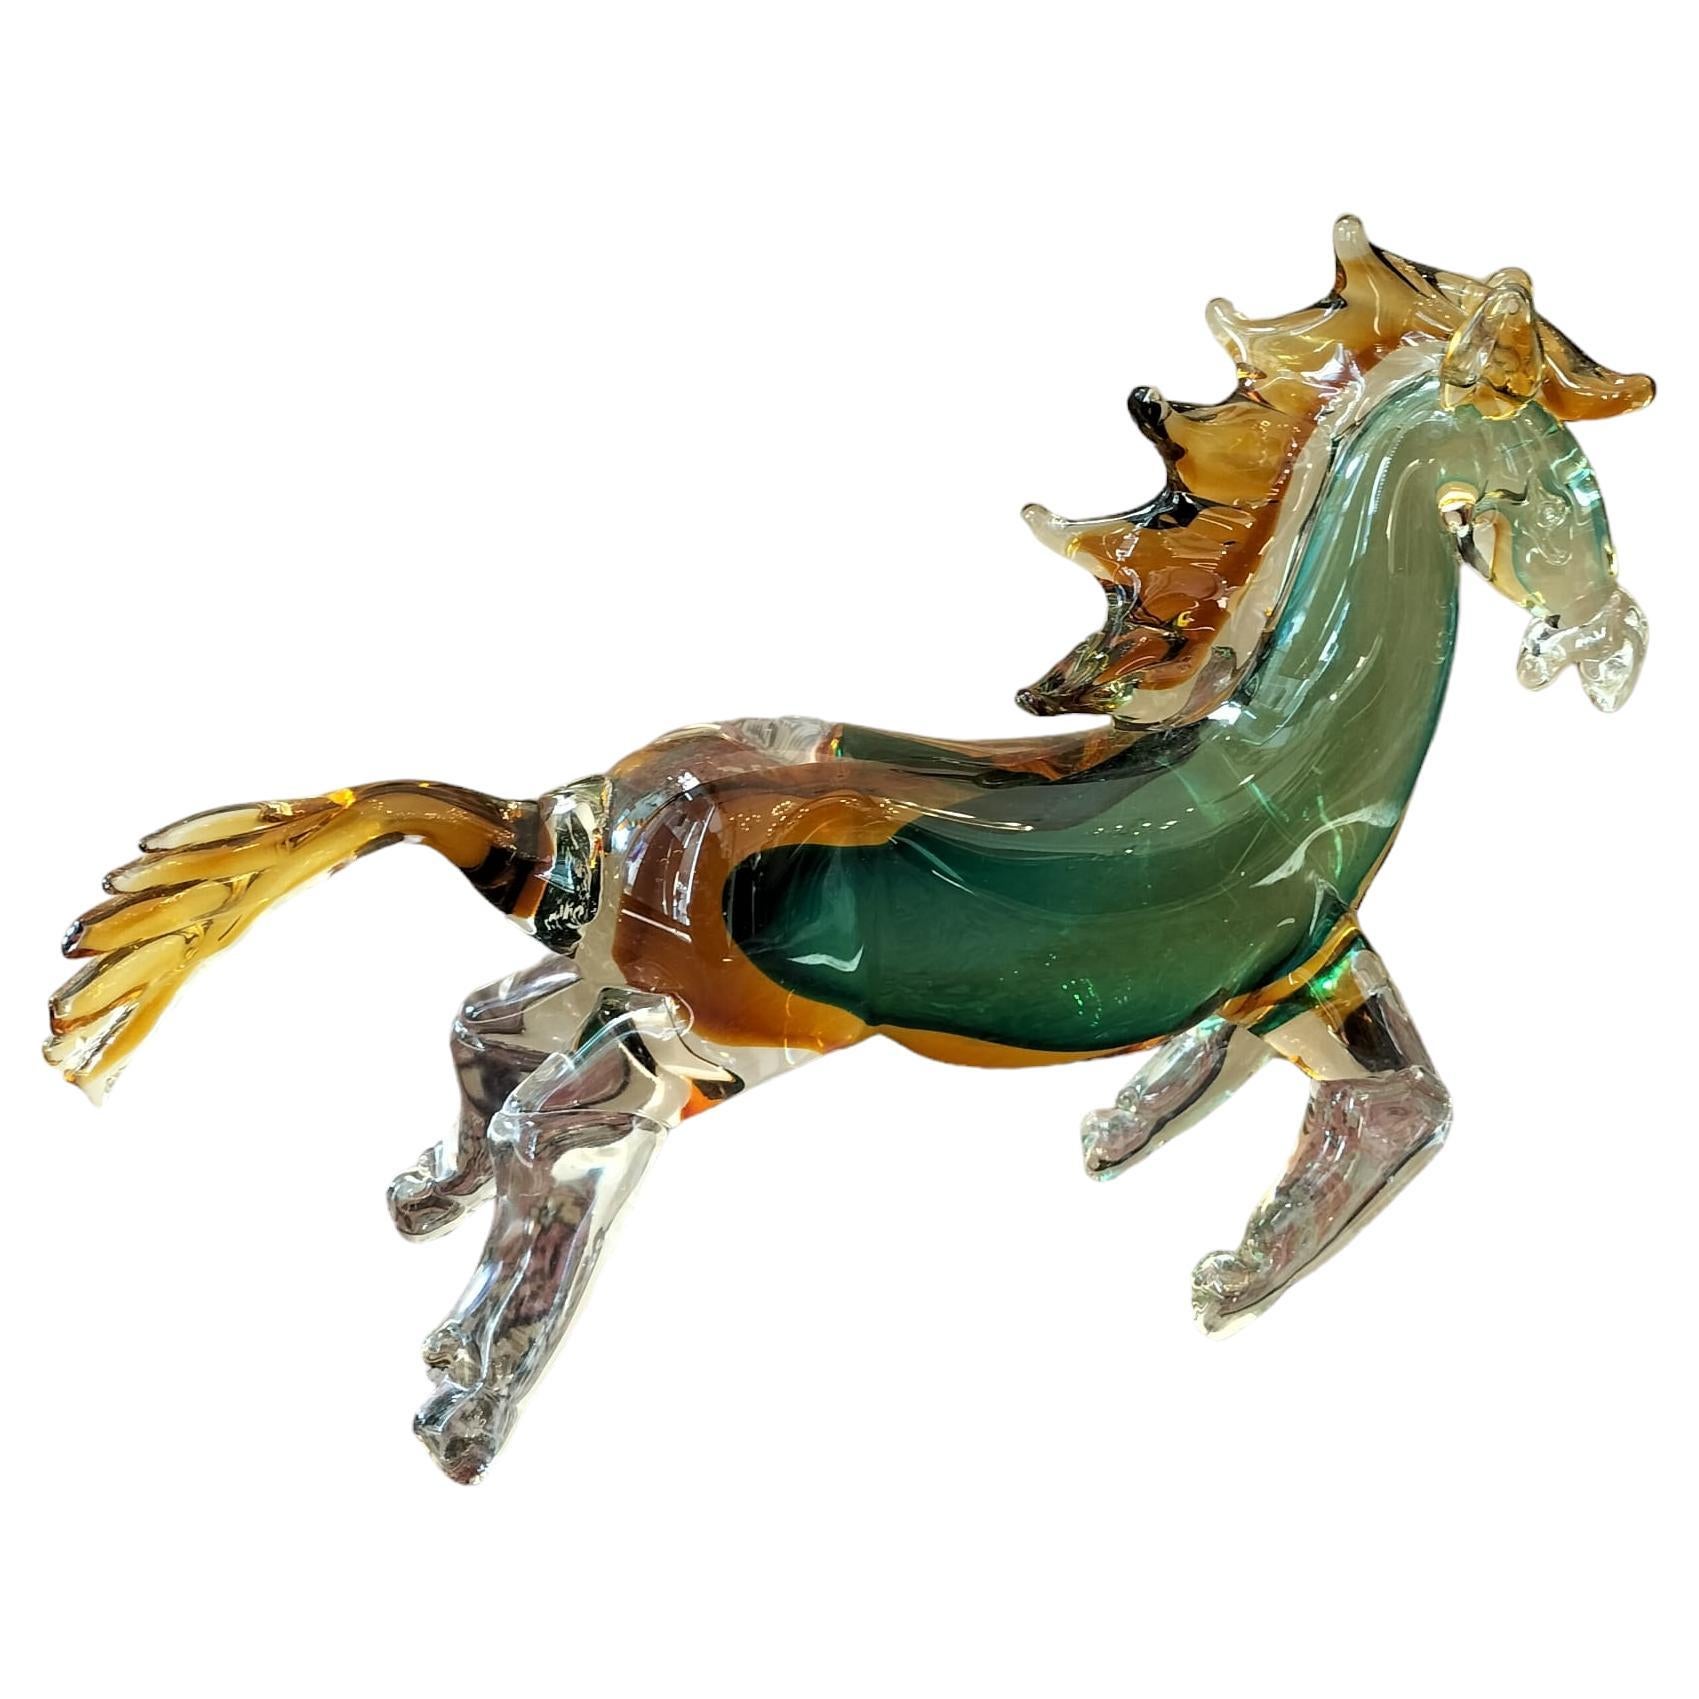 This beautiful animal sculpture, depicting a galloping horse crafted from Murano glass in vibrant green and yellow hues, was made in the late 20th century. It bears the artist's signature discreetly placed on the inner stomach of the horse. It